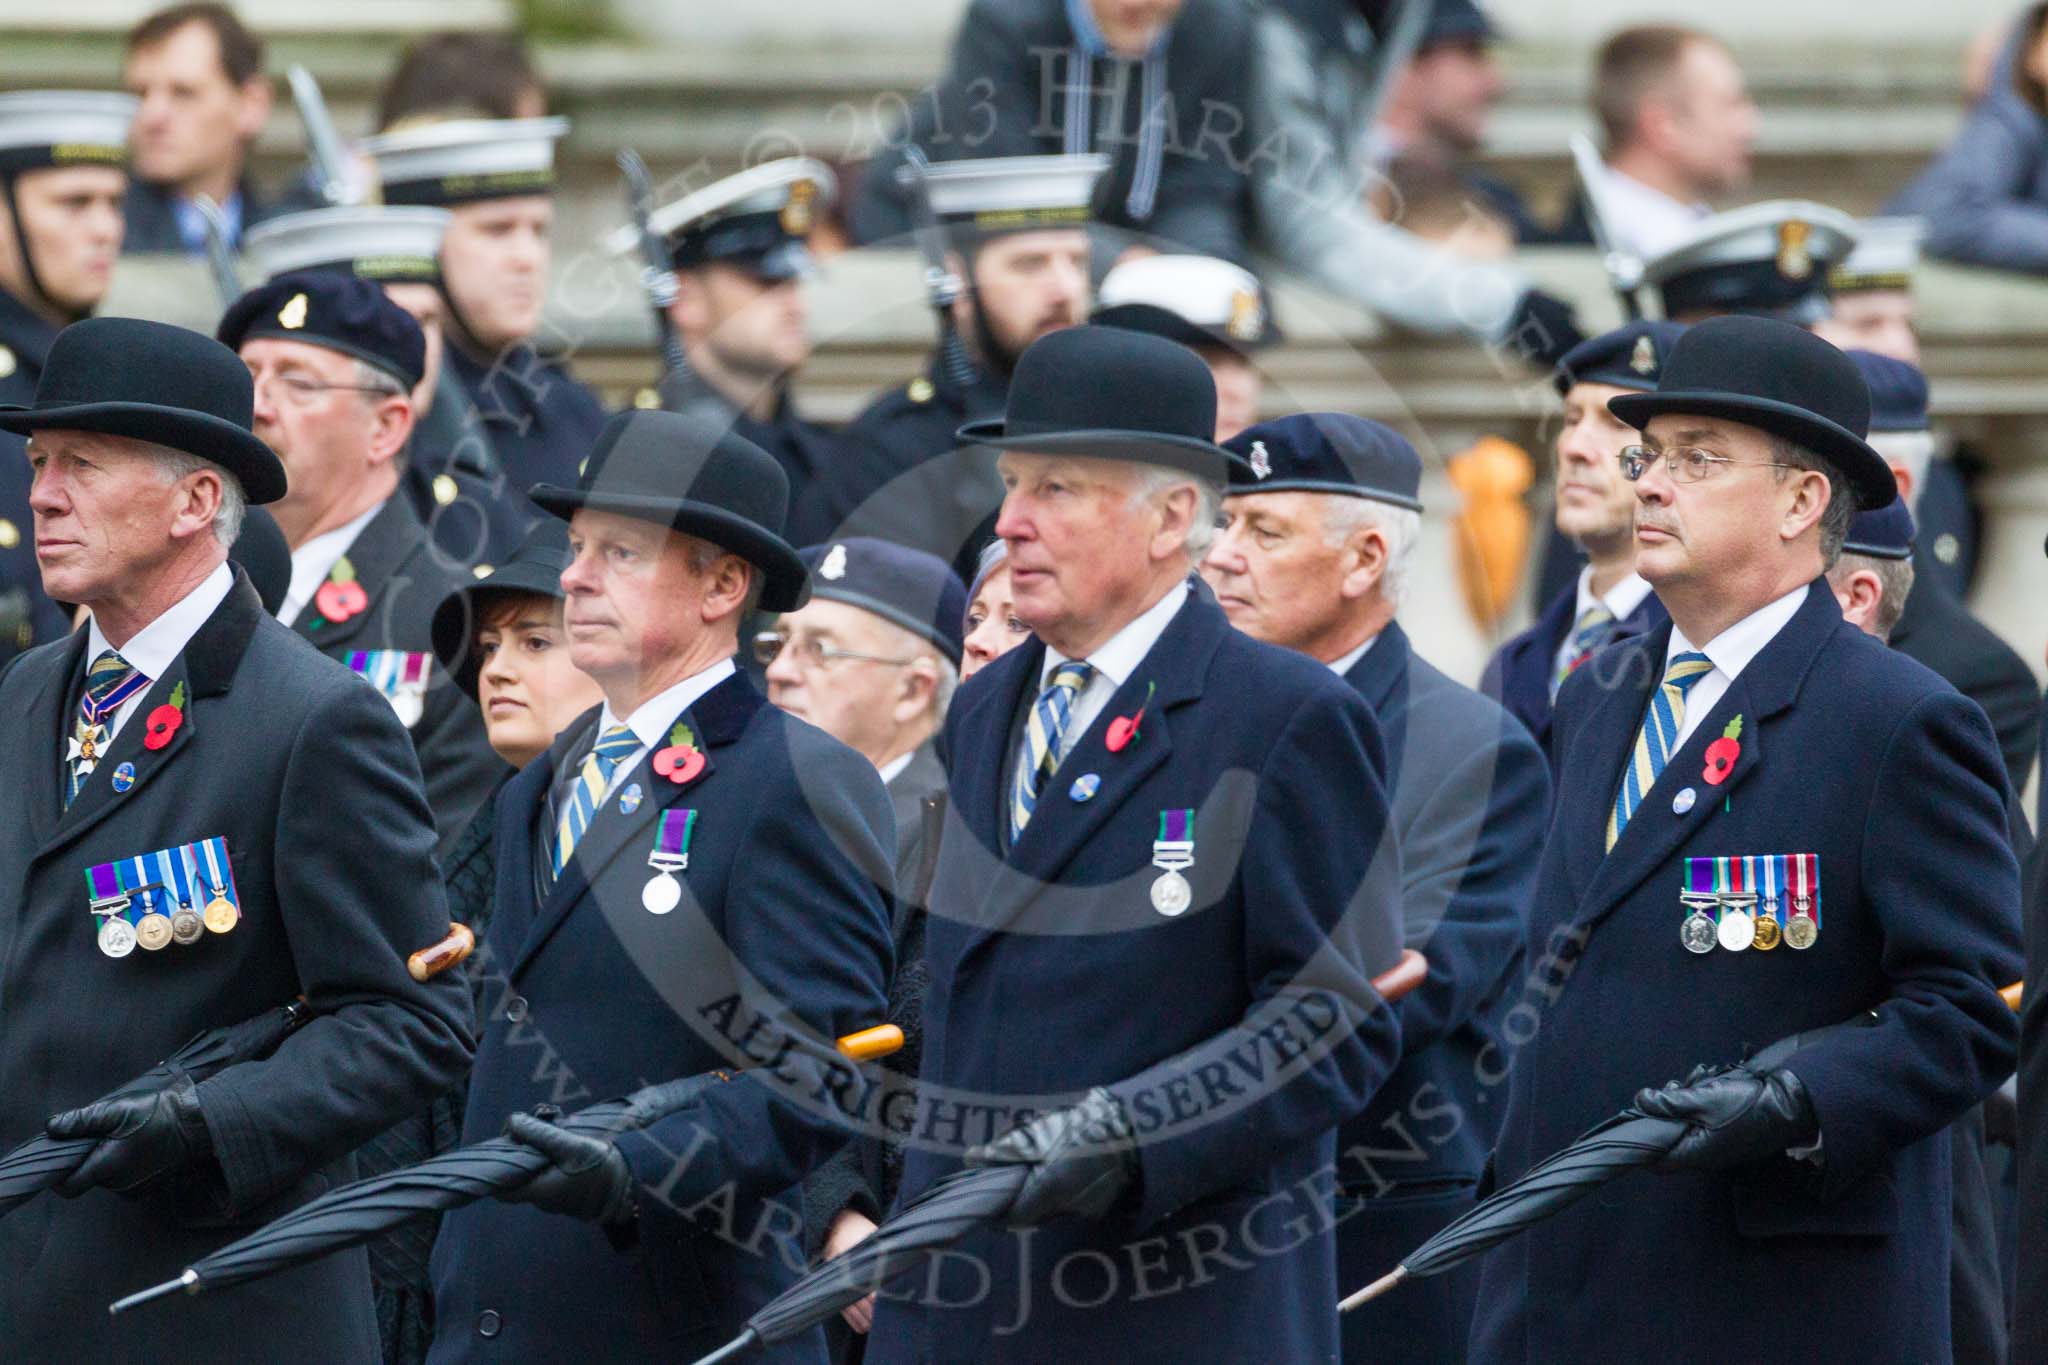 Remembrance Sunday at the Cenotaph 2015: Group B3, 3rd Regiment Royal Horse Artillery Association.
Cenotaph, Whitehall, London SW1,
London,
Greater London,
United Kingdom,
on 08 November 2015 at 11:36, image #25